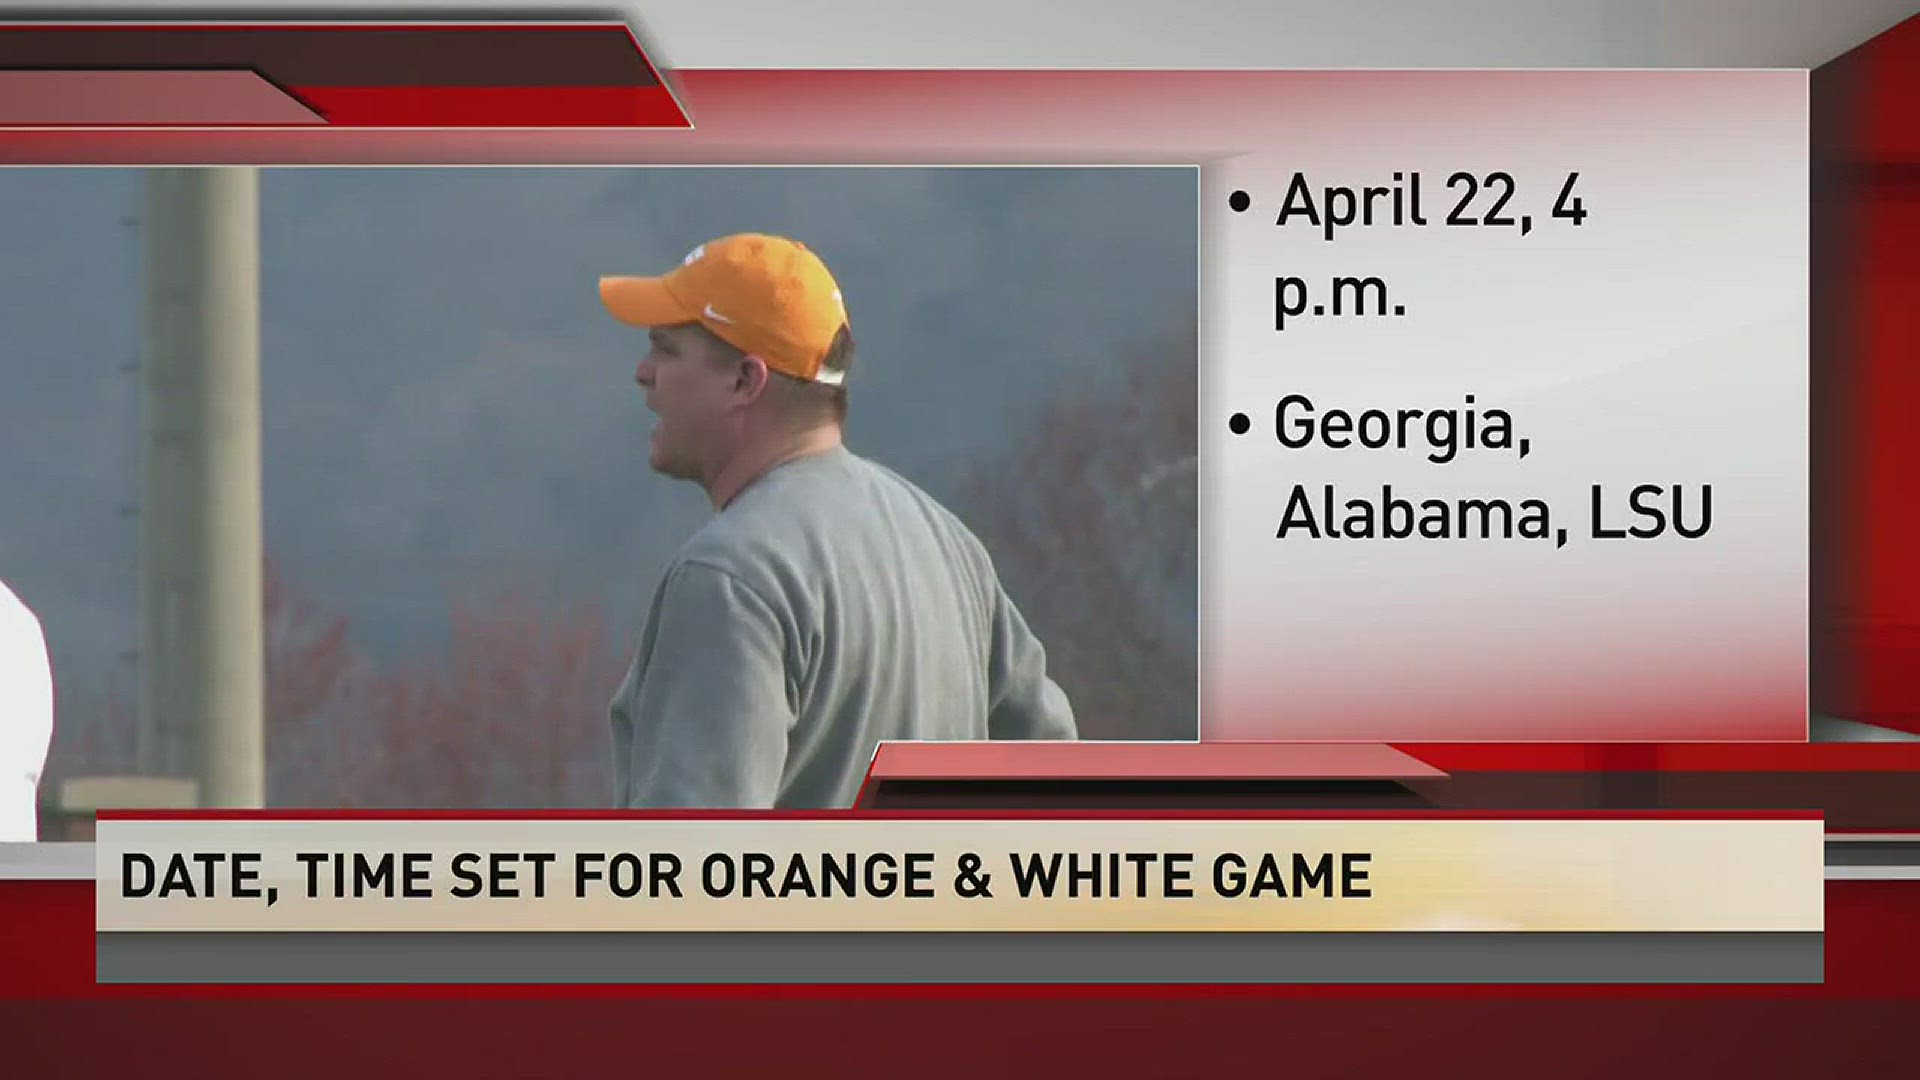 The SEC Network will televise the Vols' annual spring game at Neyland Stadium on April 22 at 4 p.m. ET.